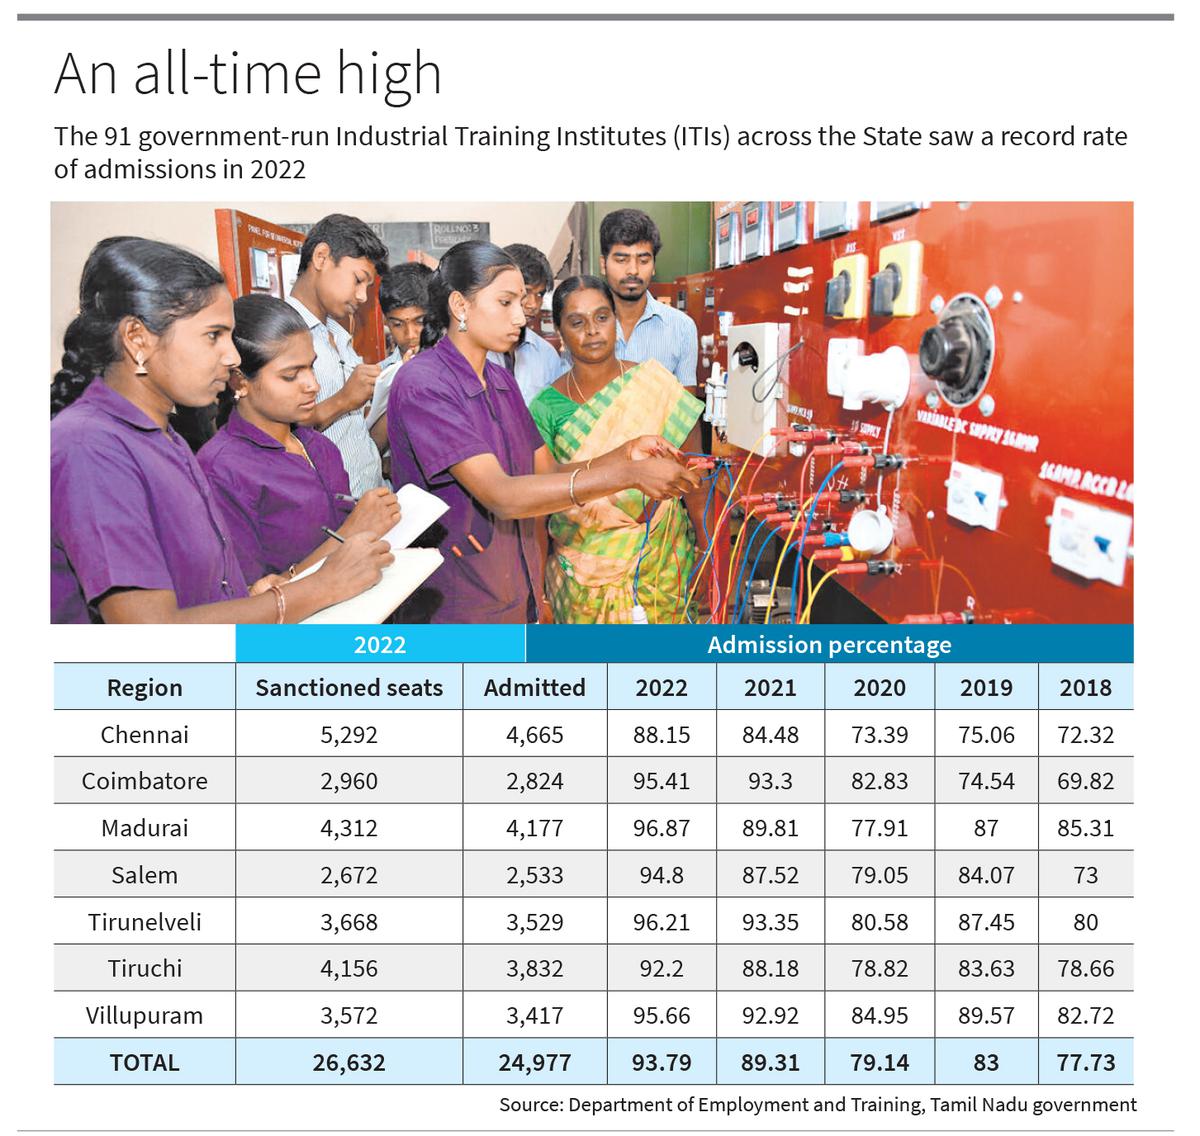 State government-run industrial training institutes exceed the 90% mark in admissions for the first time